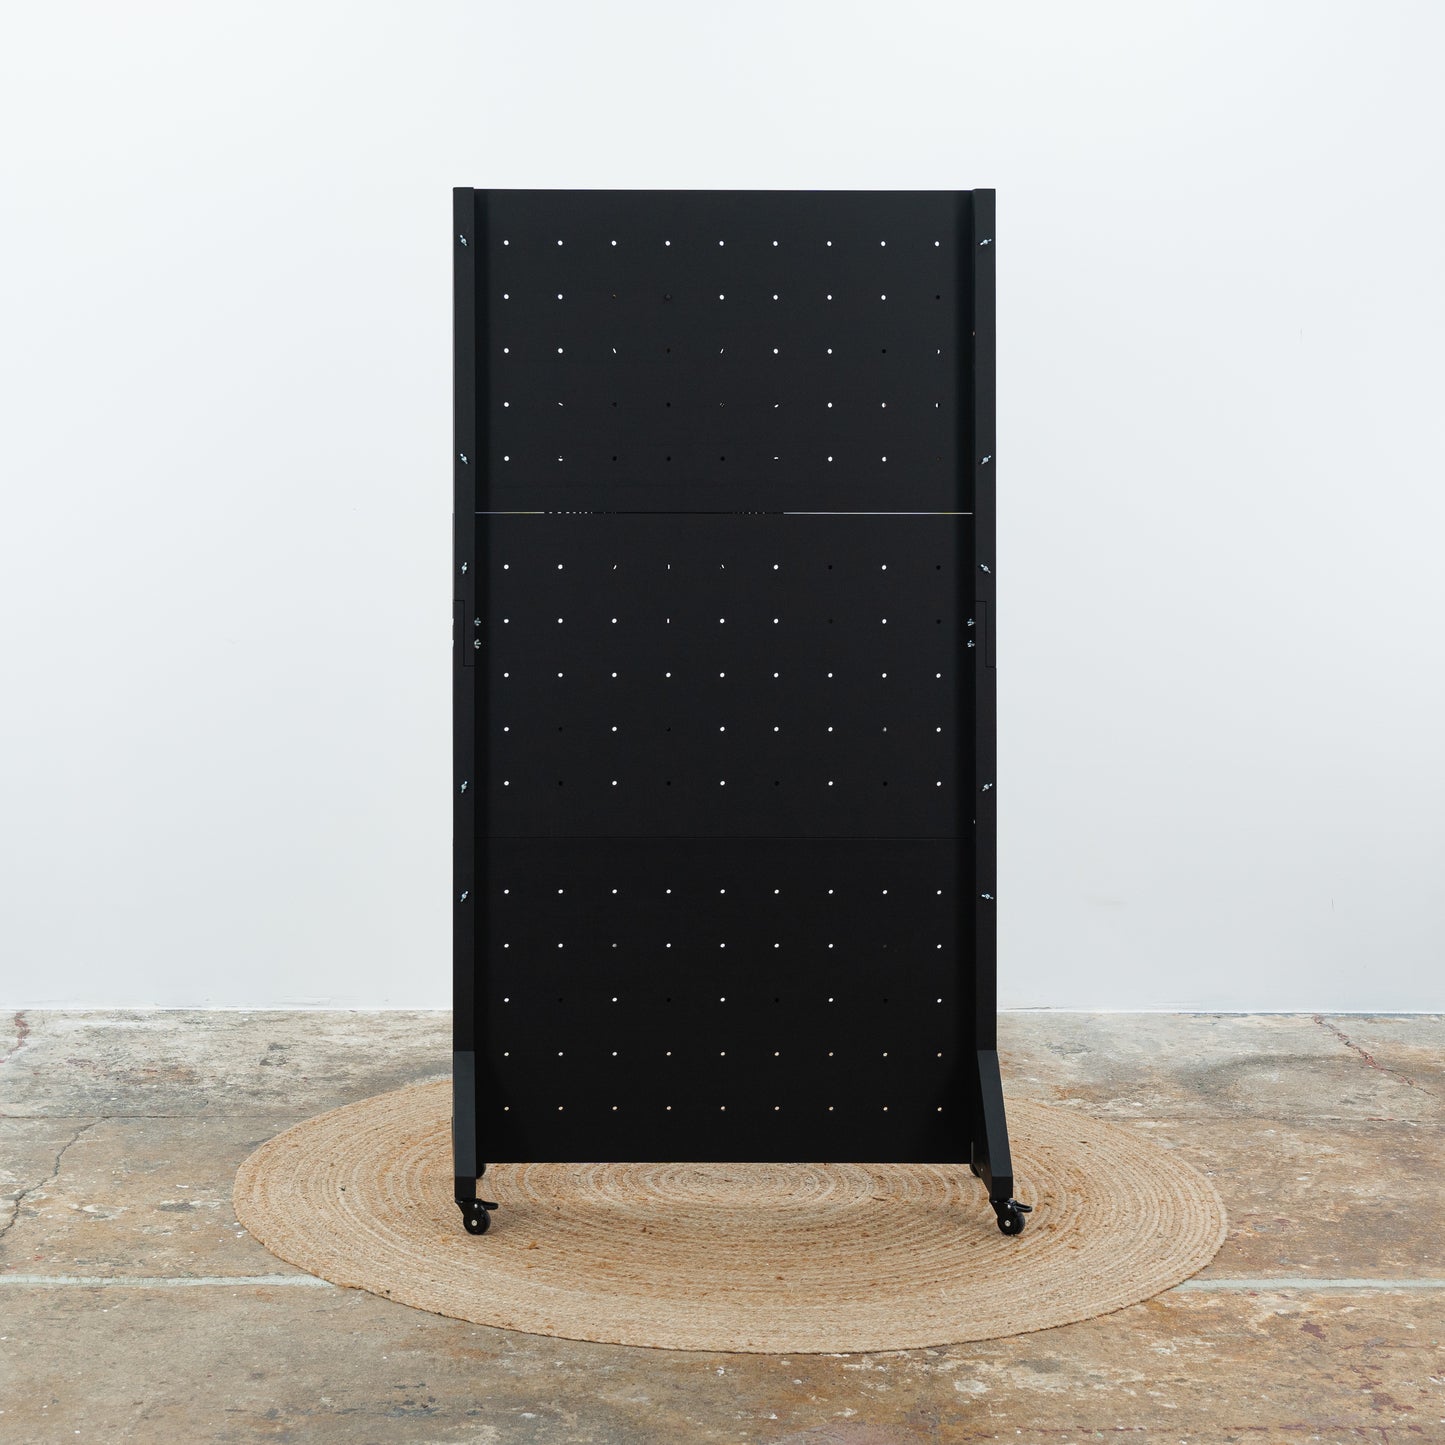 Display Pegboard VP-05-W-BL in black color for jewelry & accessories, on wheels, collapsible for trade show use